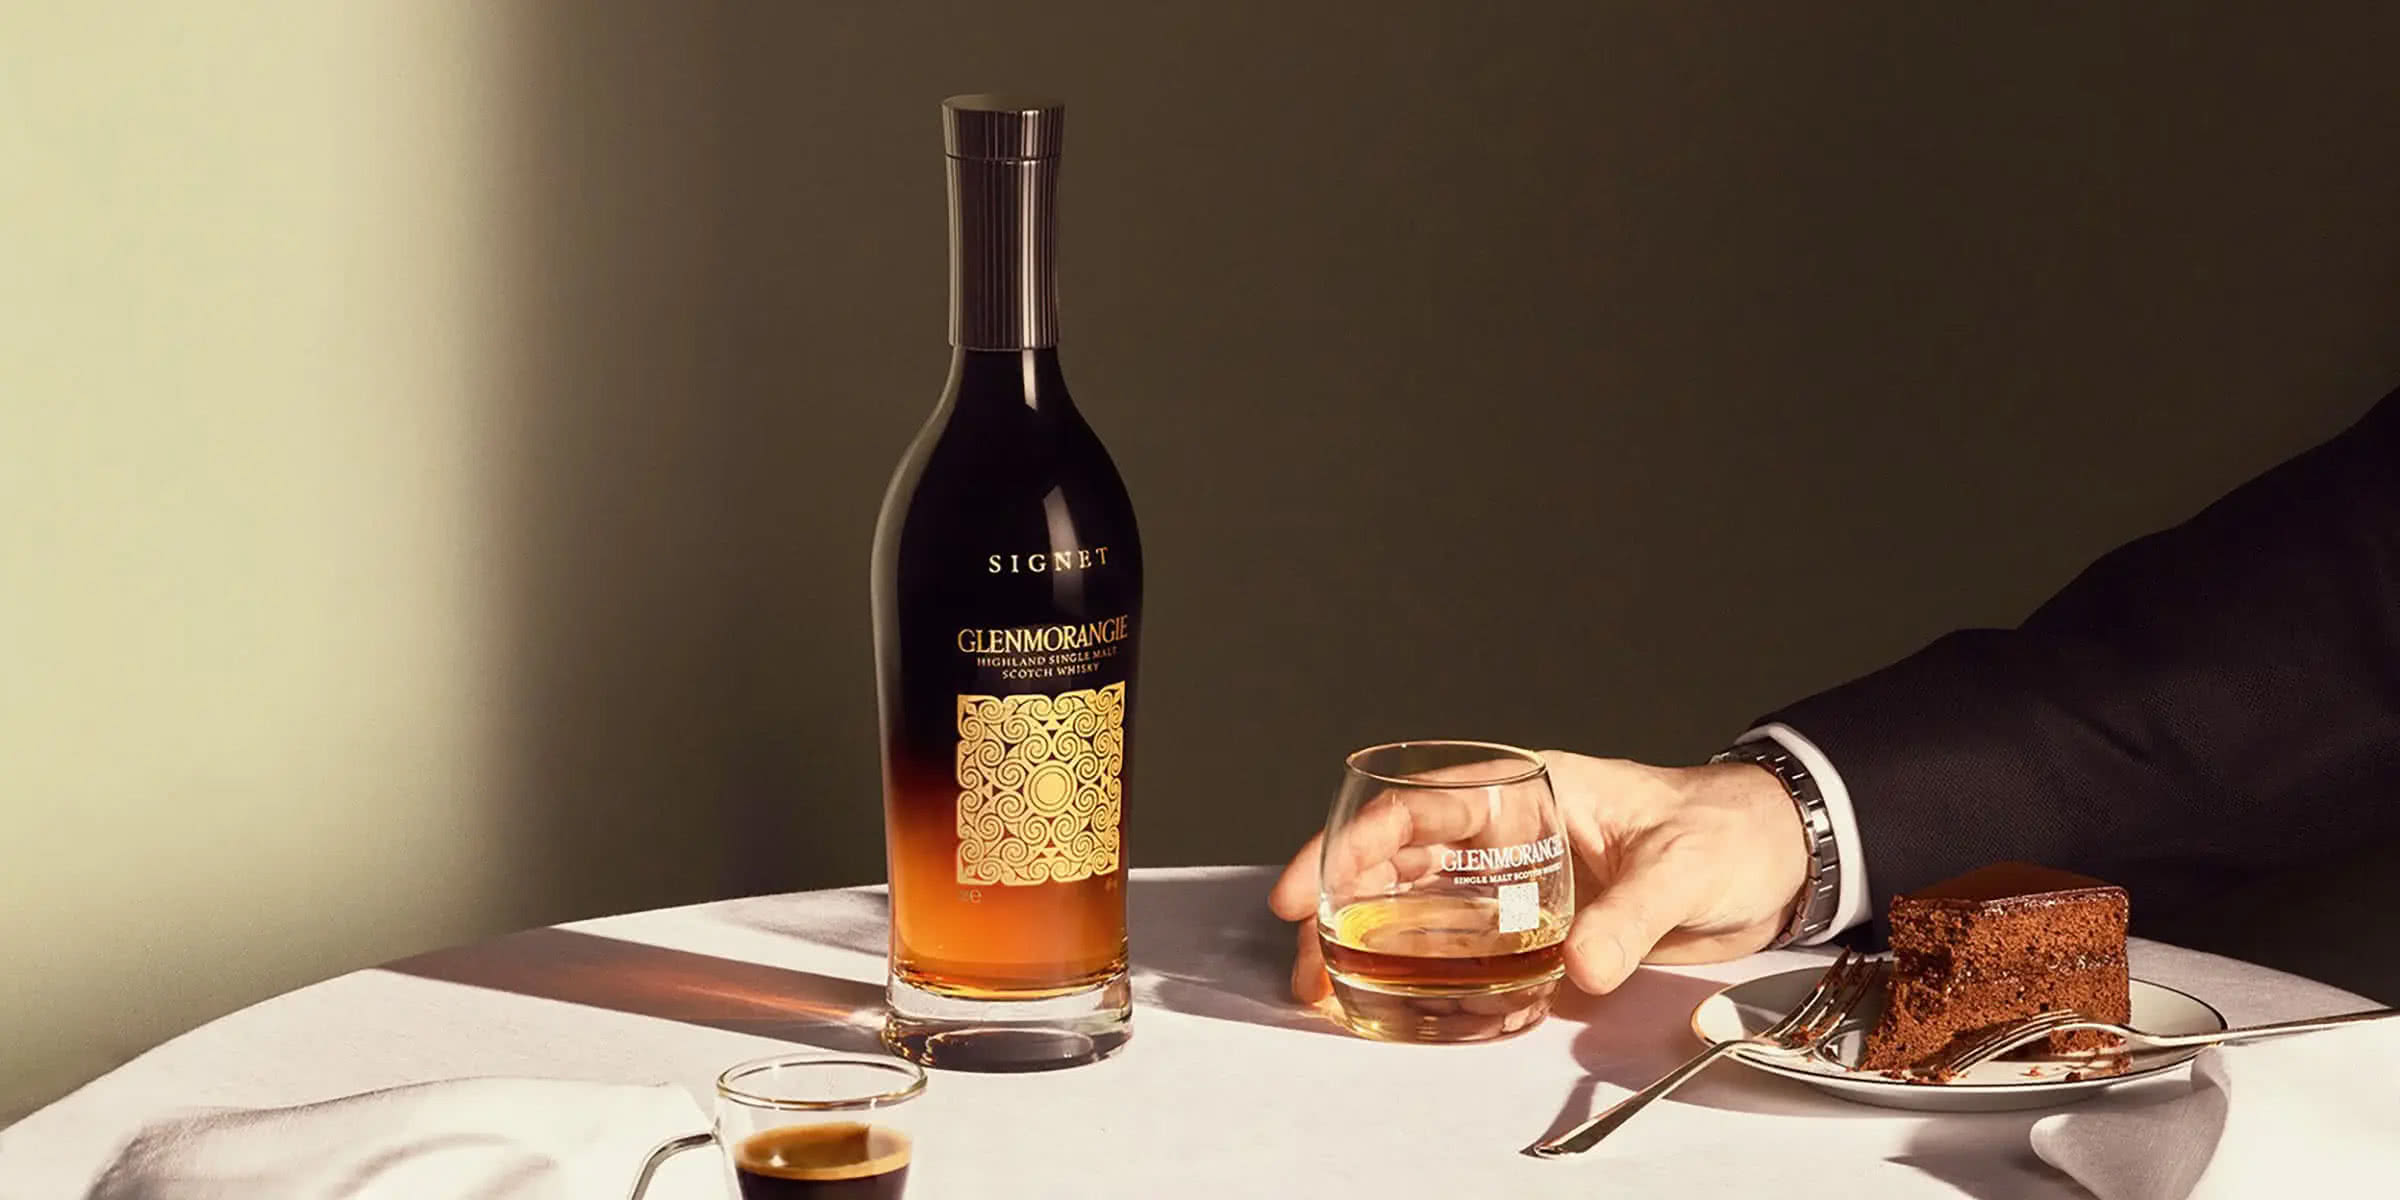 15 Best Whisky In The World: The Whisky Brands To Drink (2023)